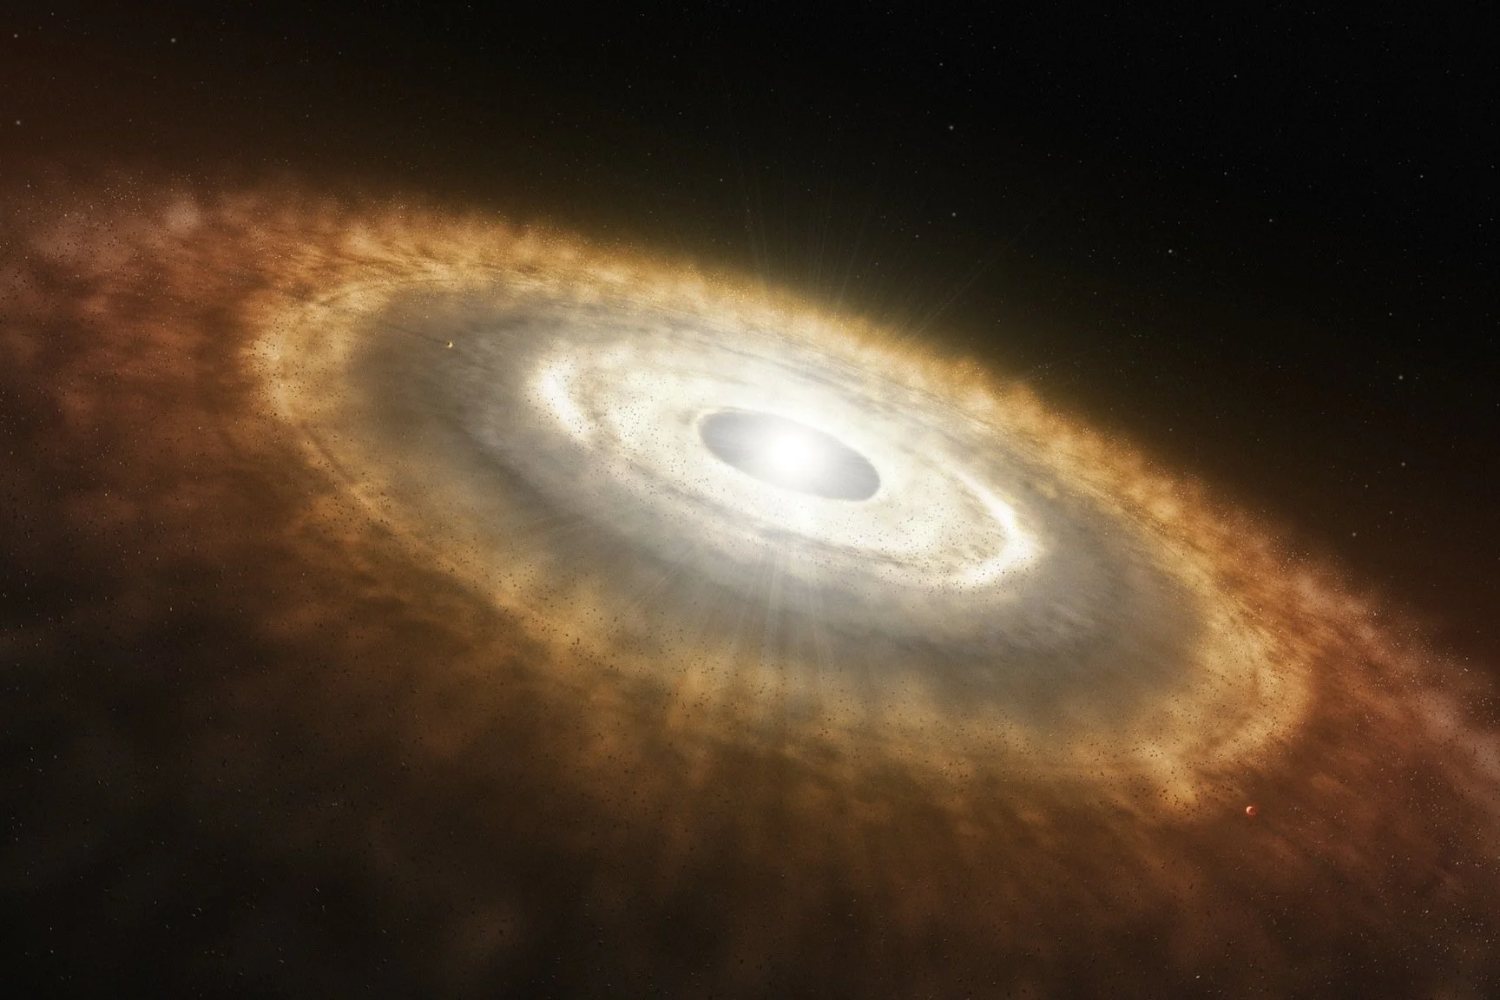 Observational constraints on protoplanetary disks